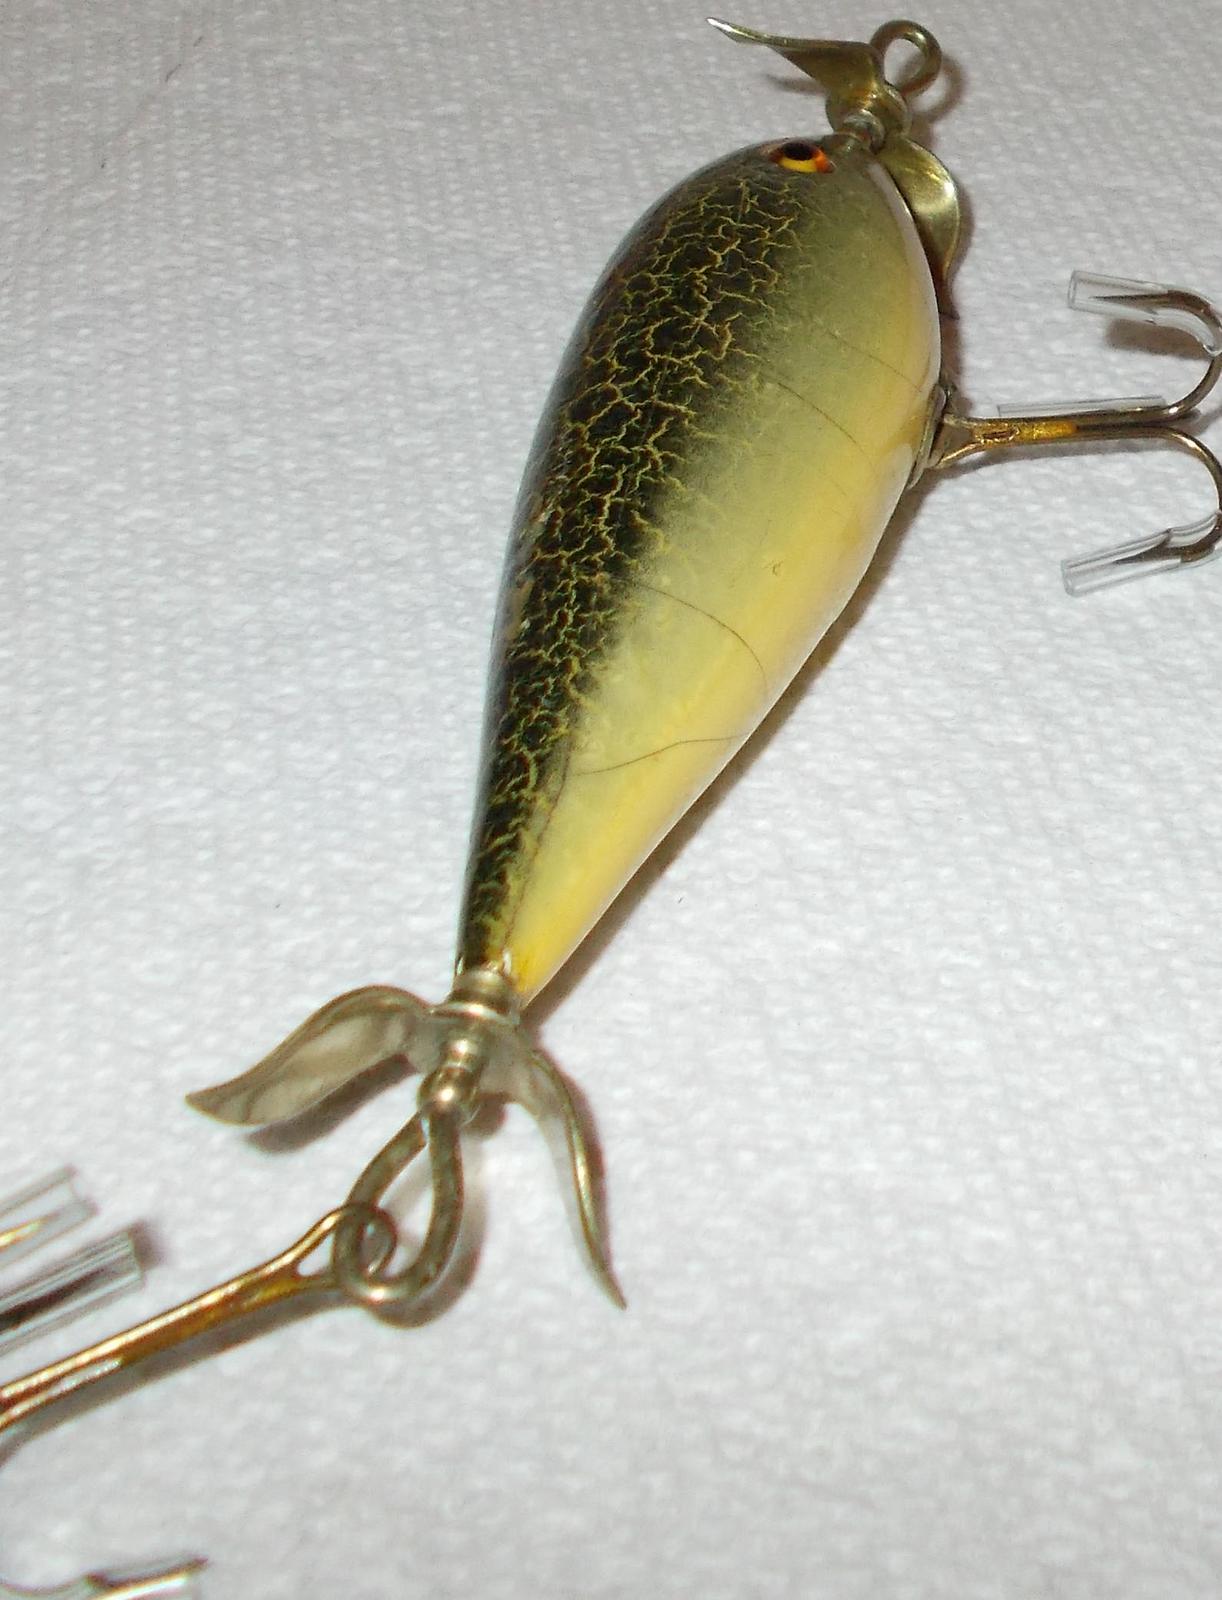 EARLY HEDDON #300 GLASS EYES L-RIG SURFACE LURE | The